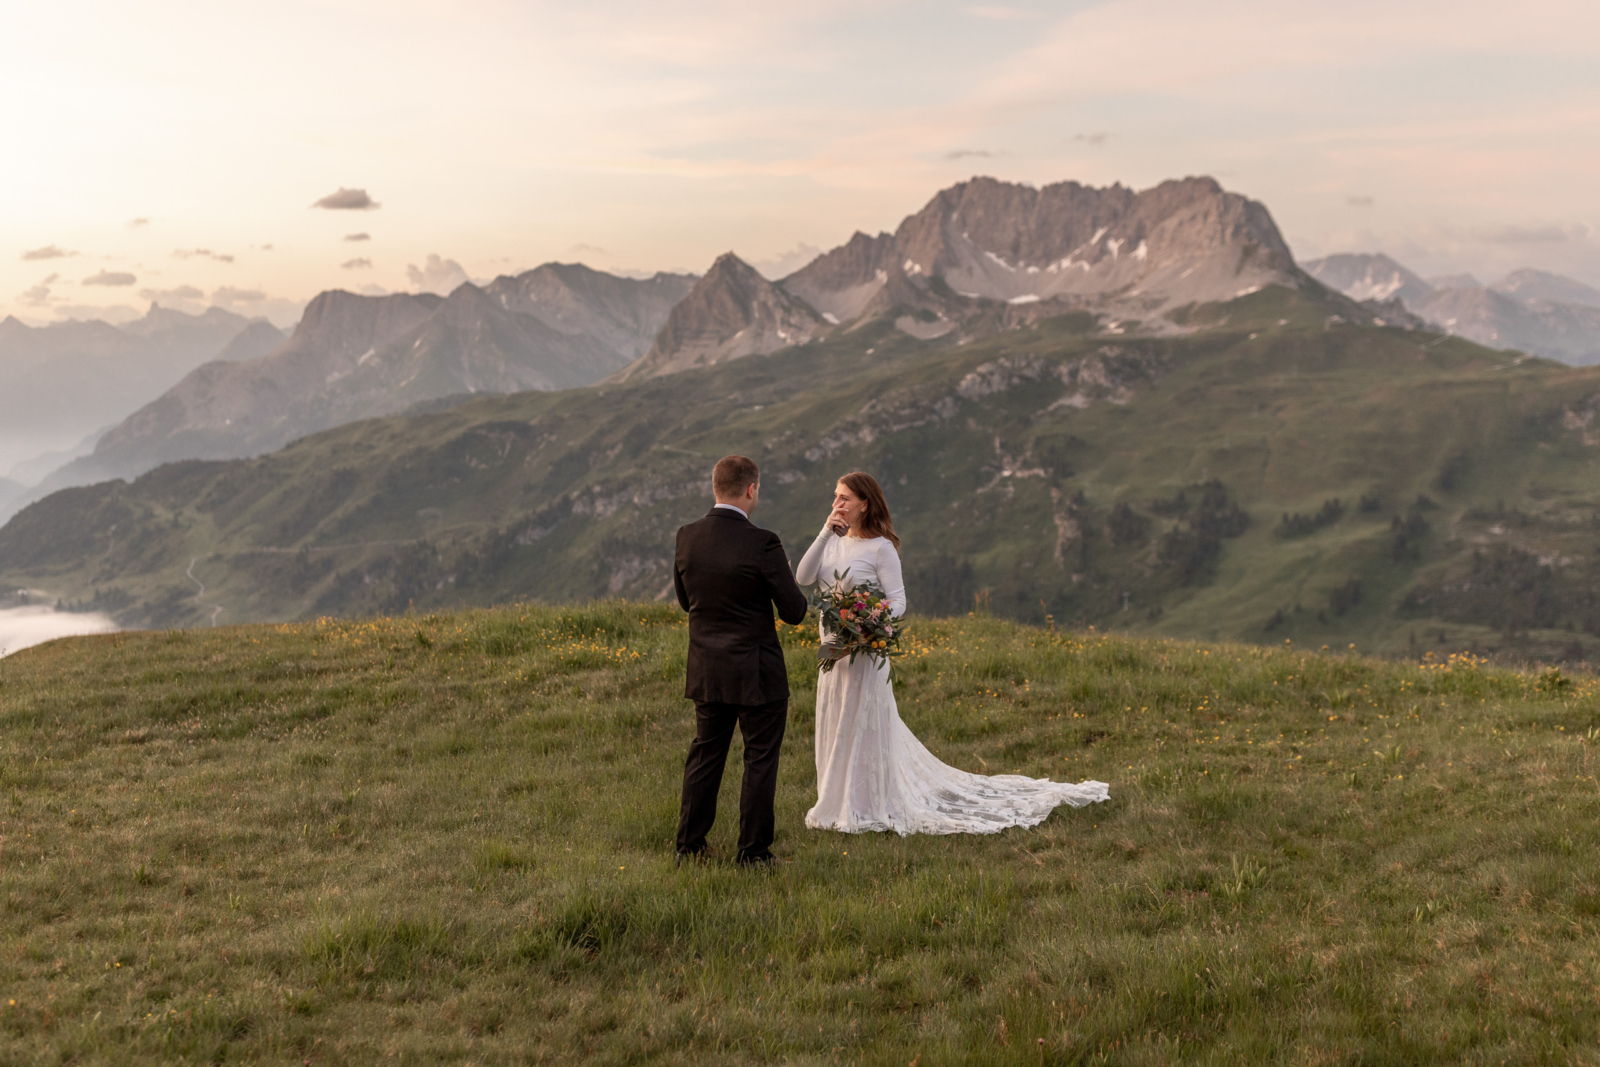 emotional wedding ceremony in the mountains